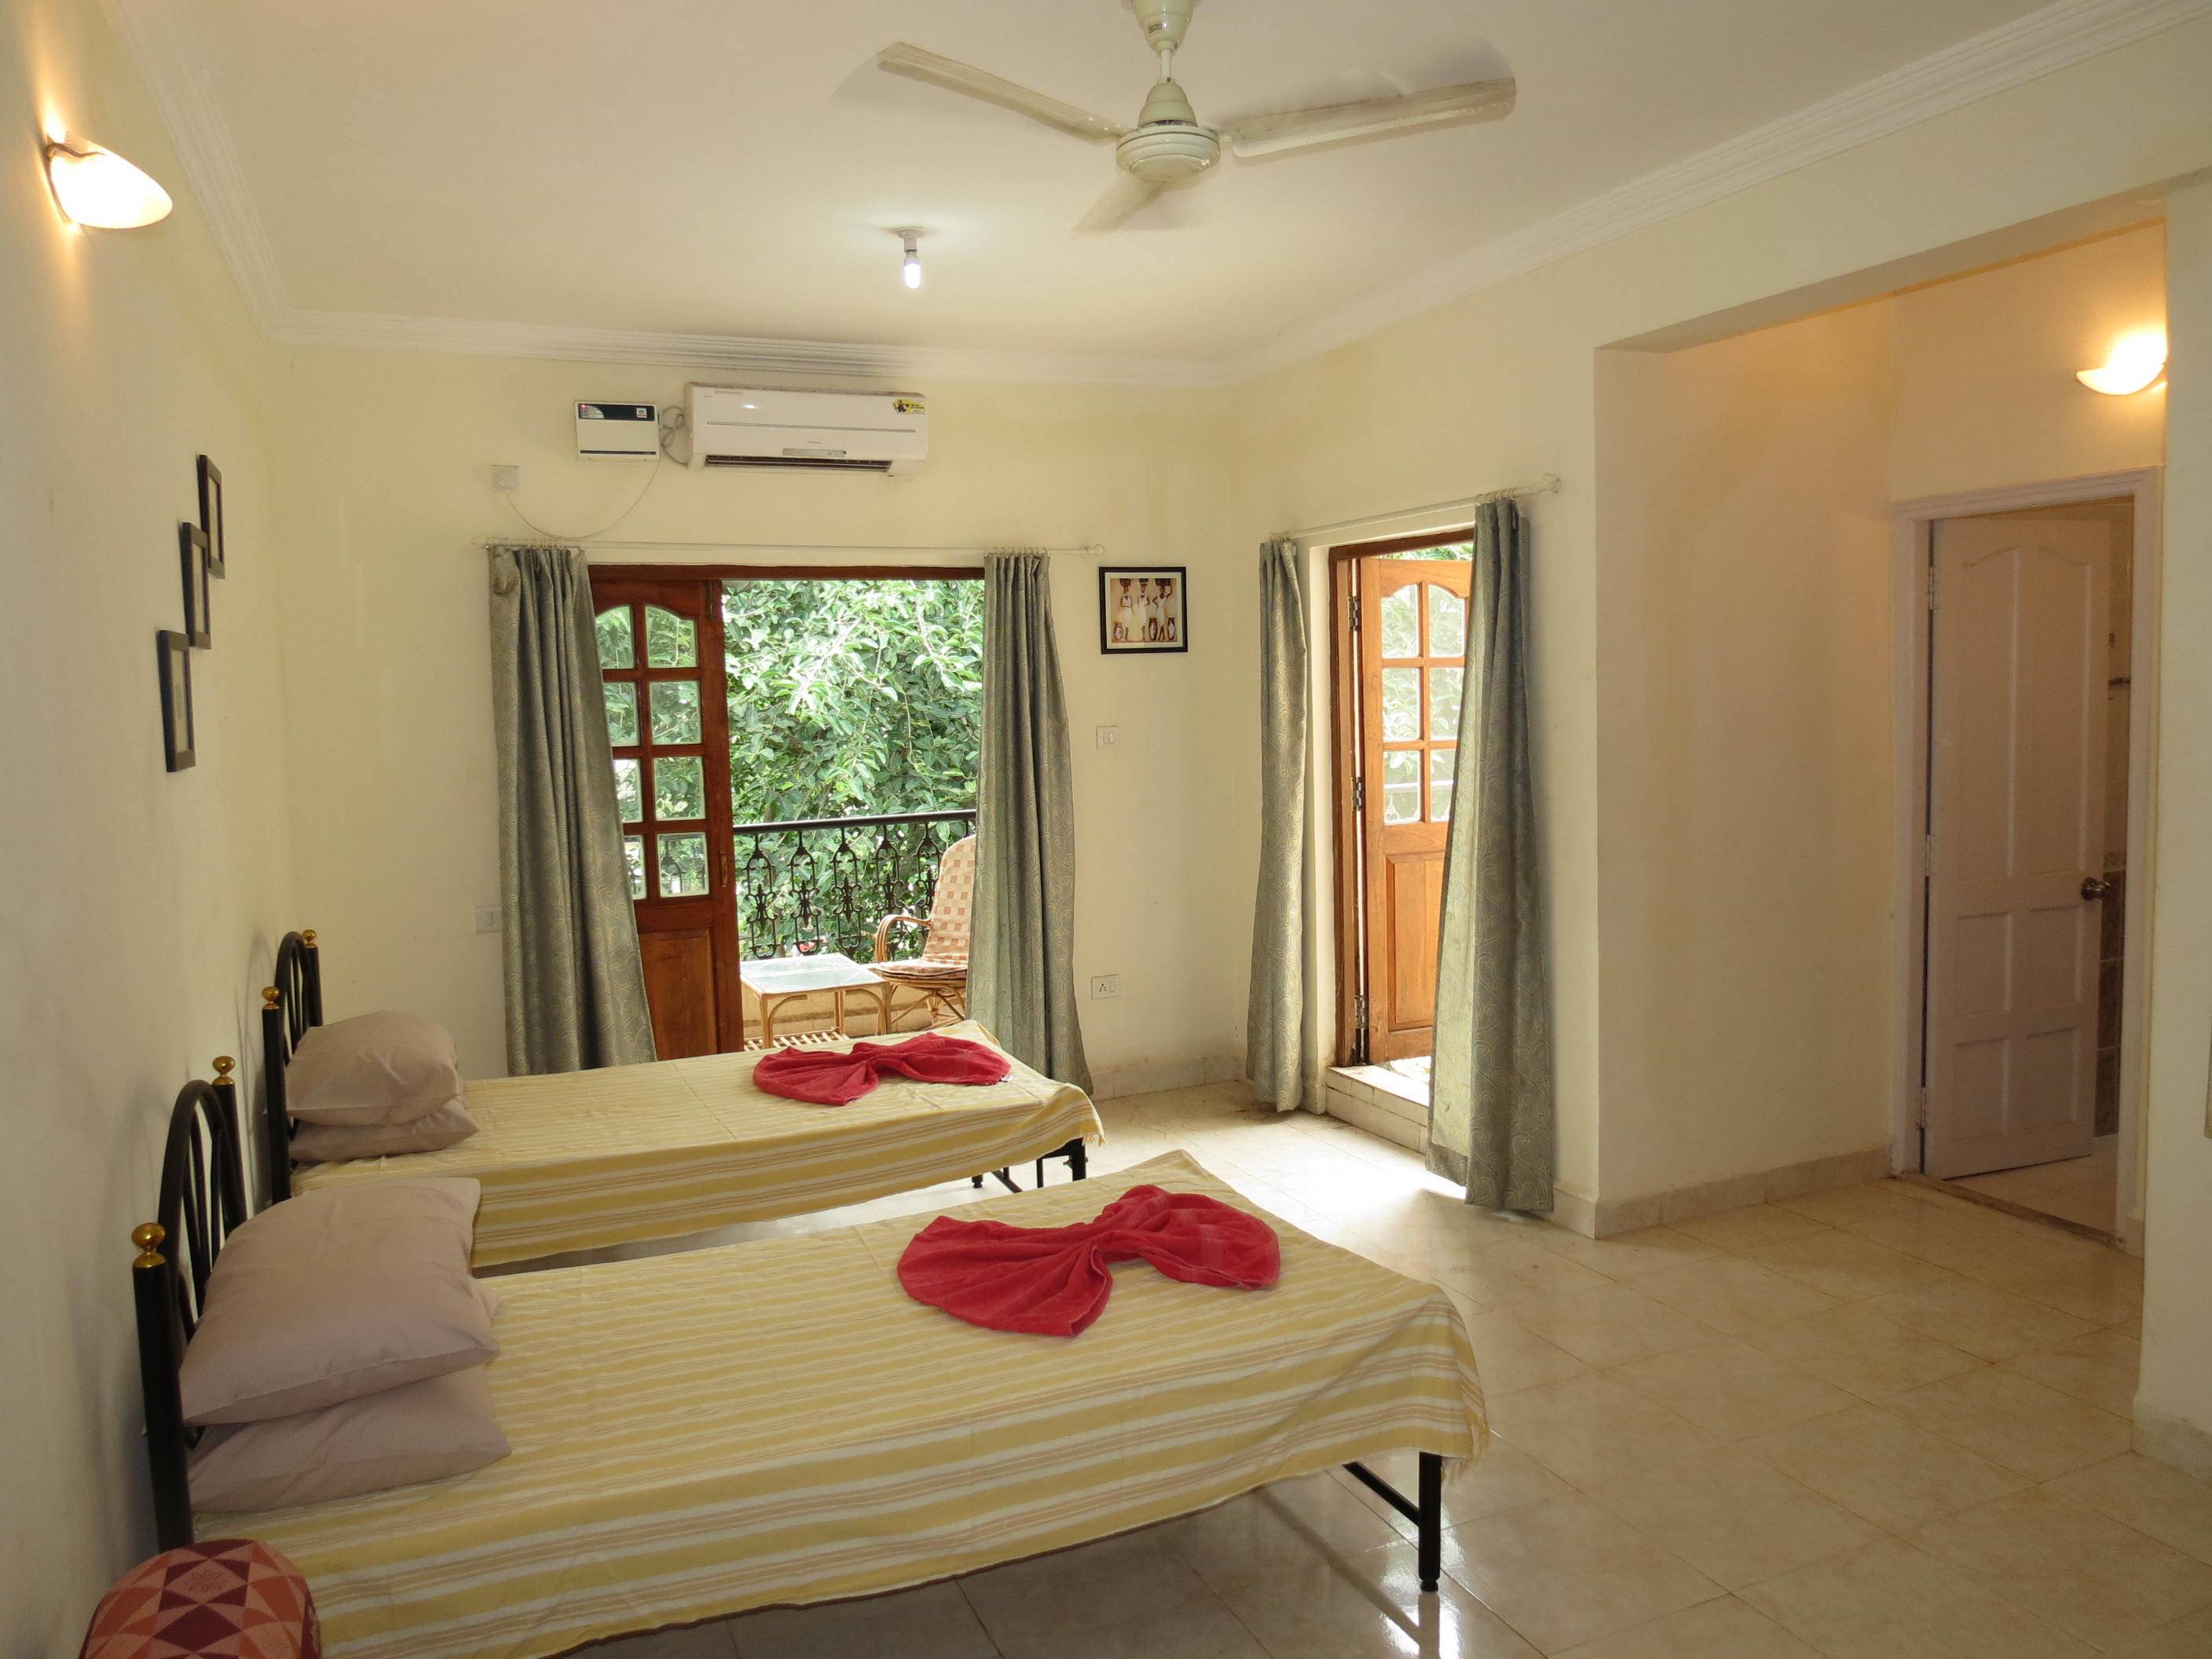 The 15 best hotels in calangute. book cheap apartments and hotels calangute, north goa, india